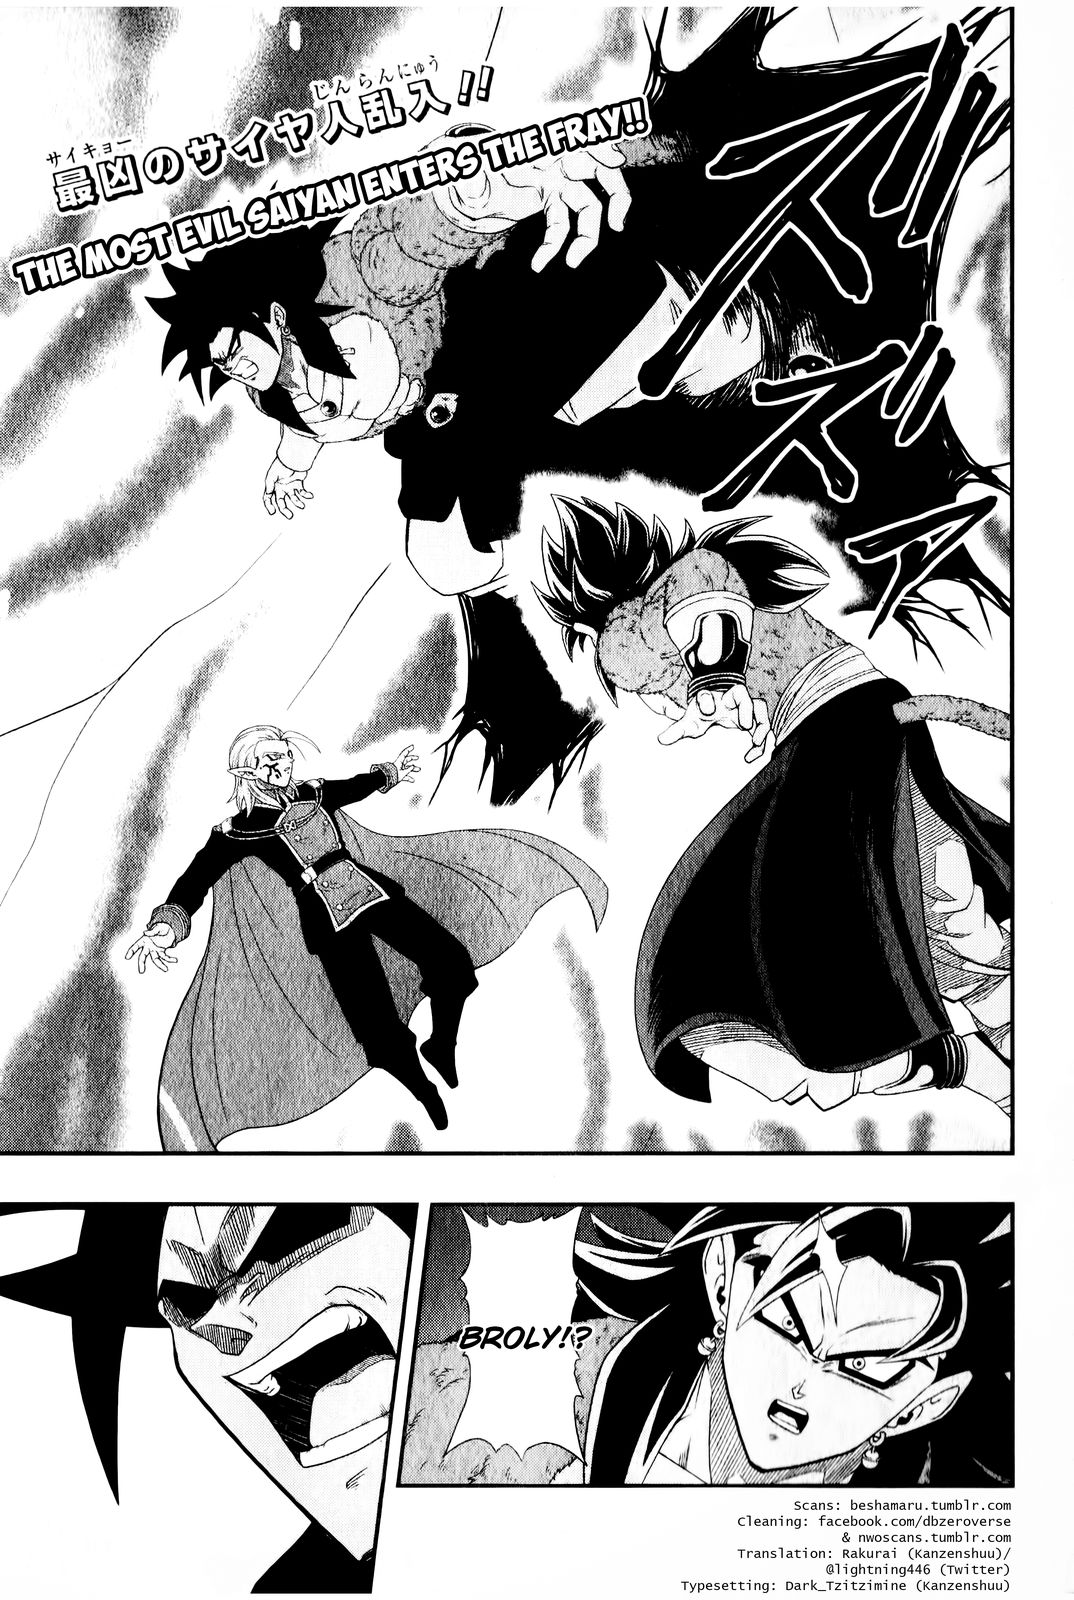 Super Dragon Ball Heroes: Big Bang Mission! Vol.2 Chapter 6: The Two Vegettos Go Up Against The Dark King In The Ultimate Clash!!! - Picture 2